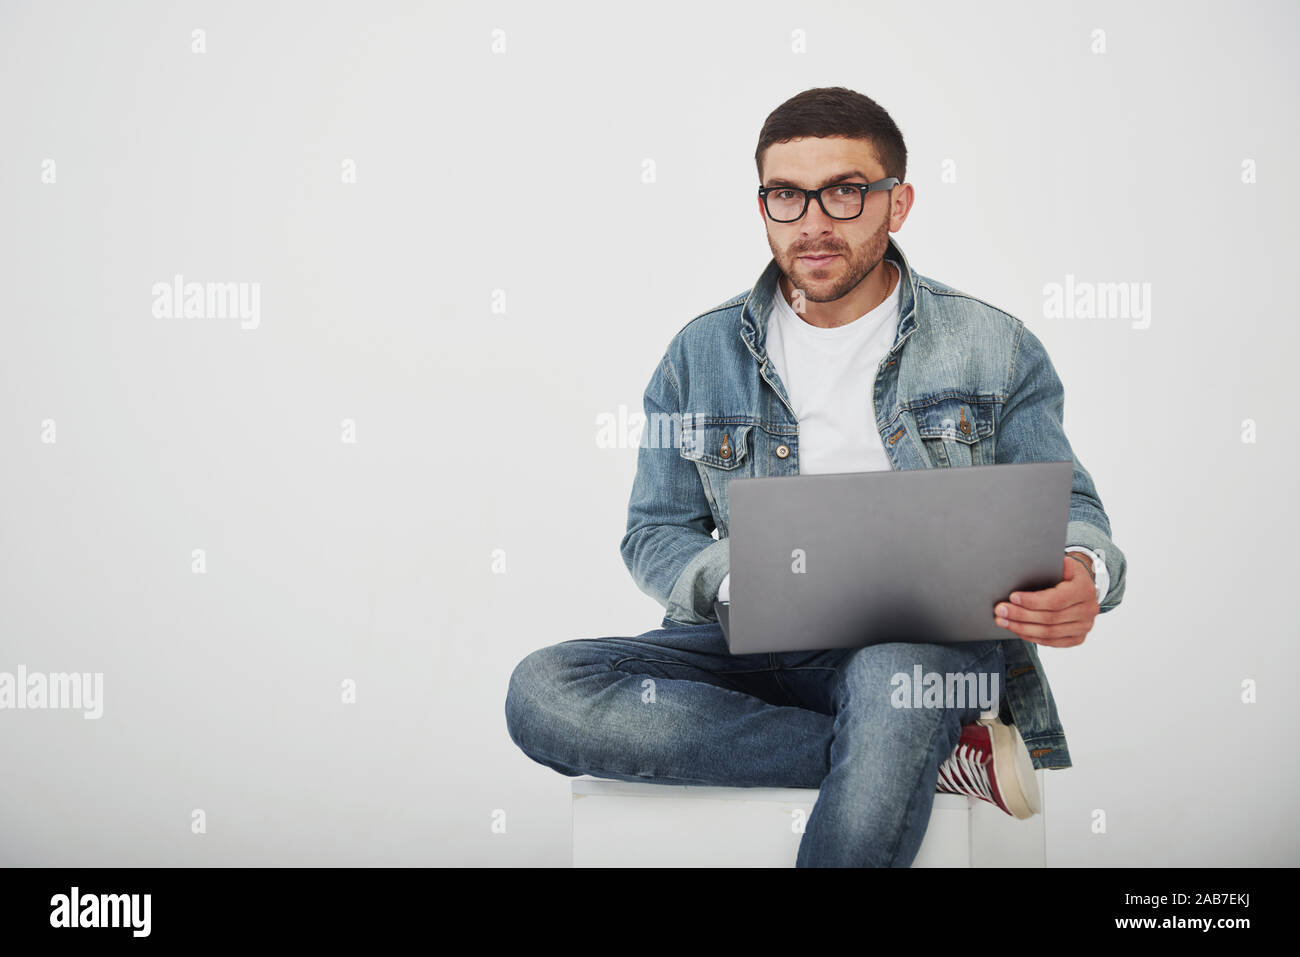 Handsome young man with laptop and check his timetable on white background Stock Photo